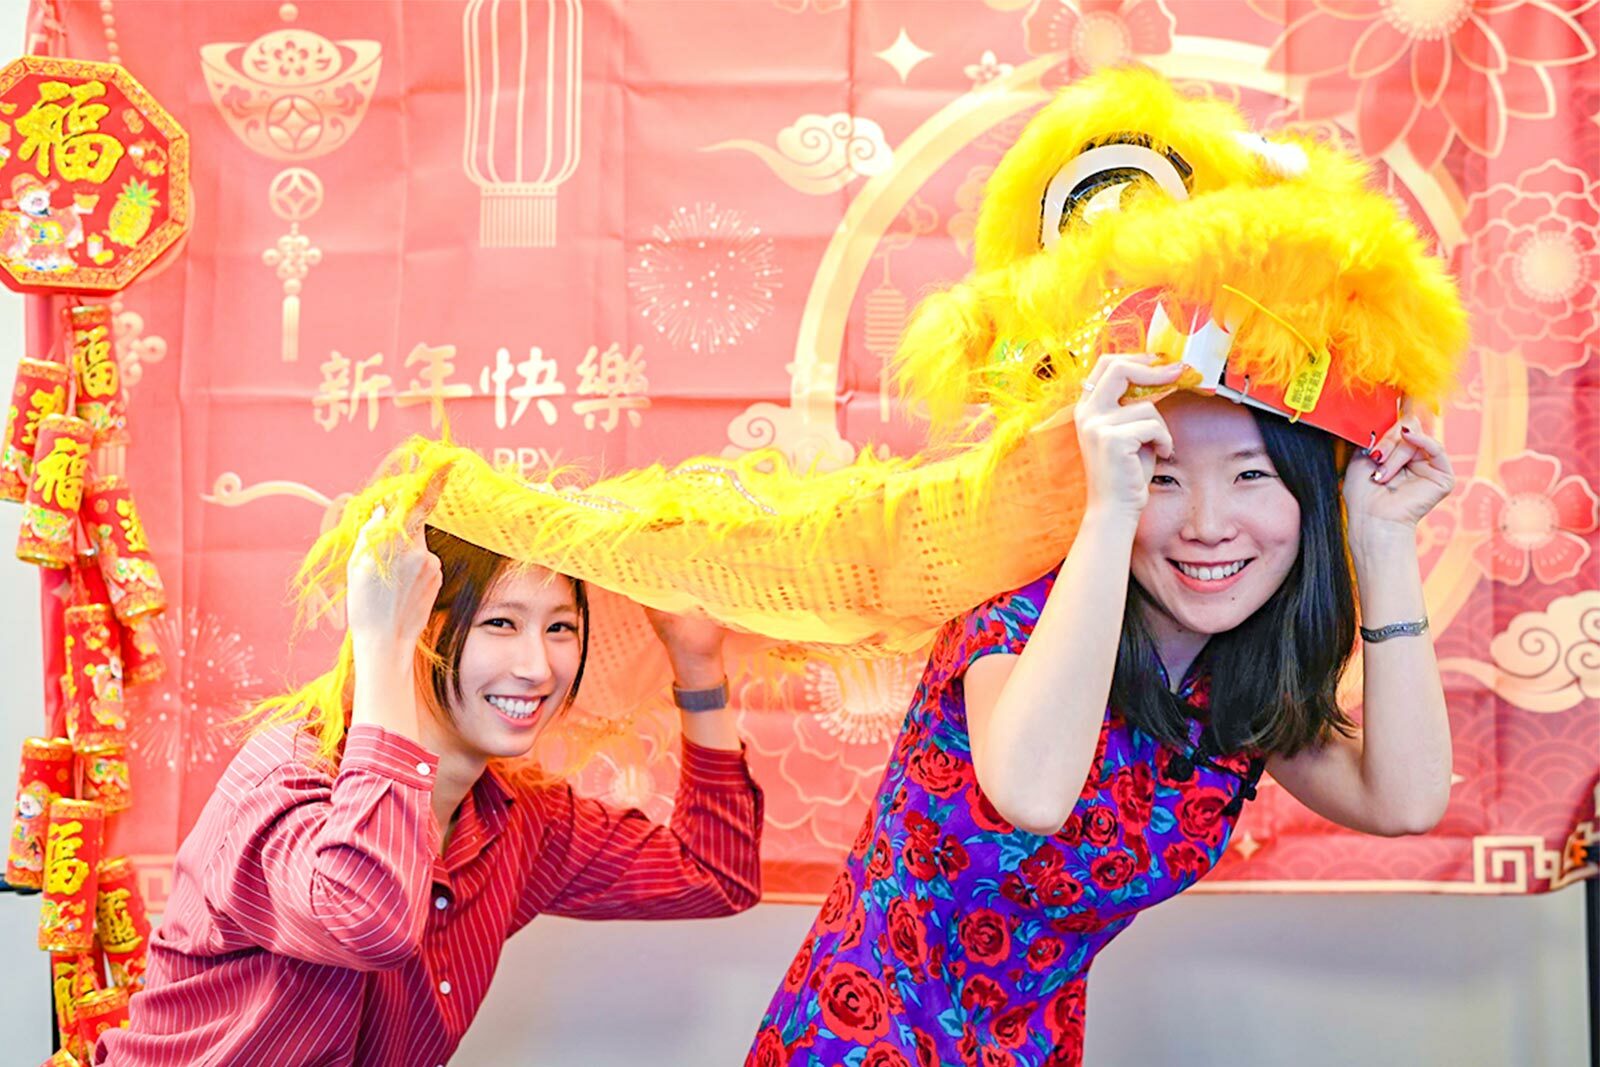 Two people celebrating Lunar New Year with a dragon.